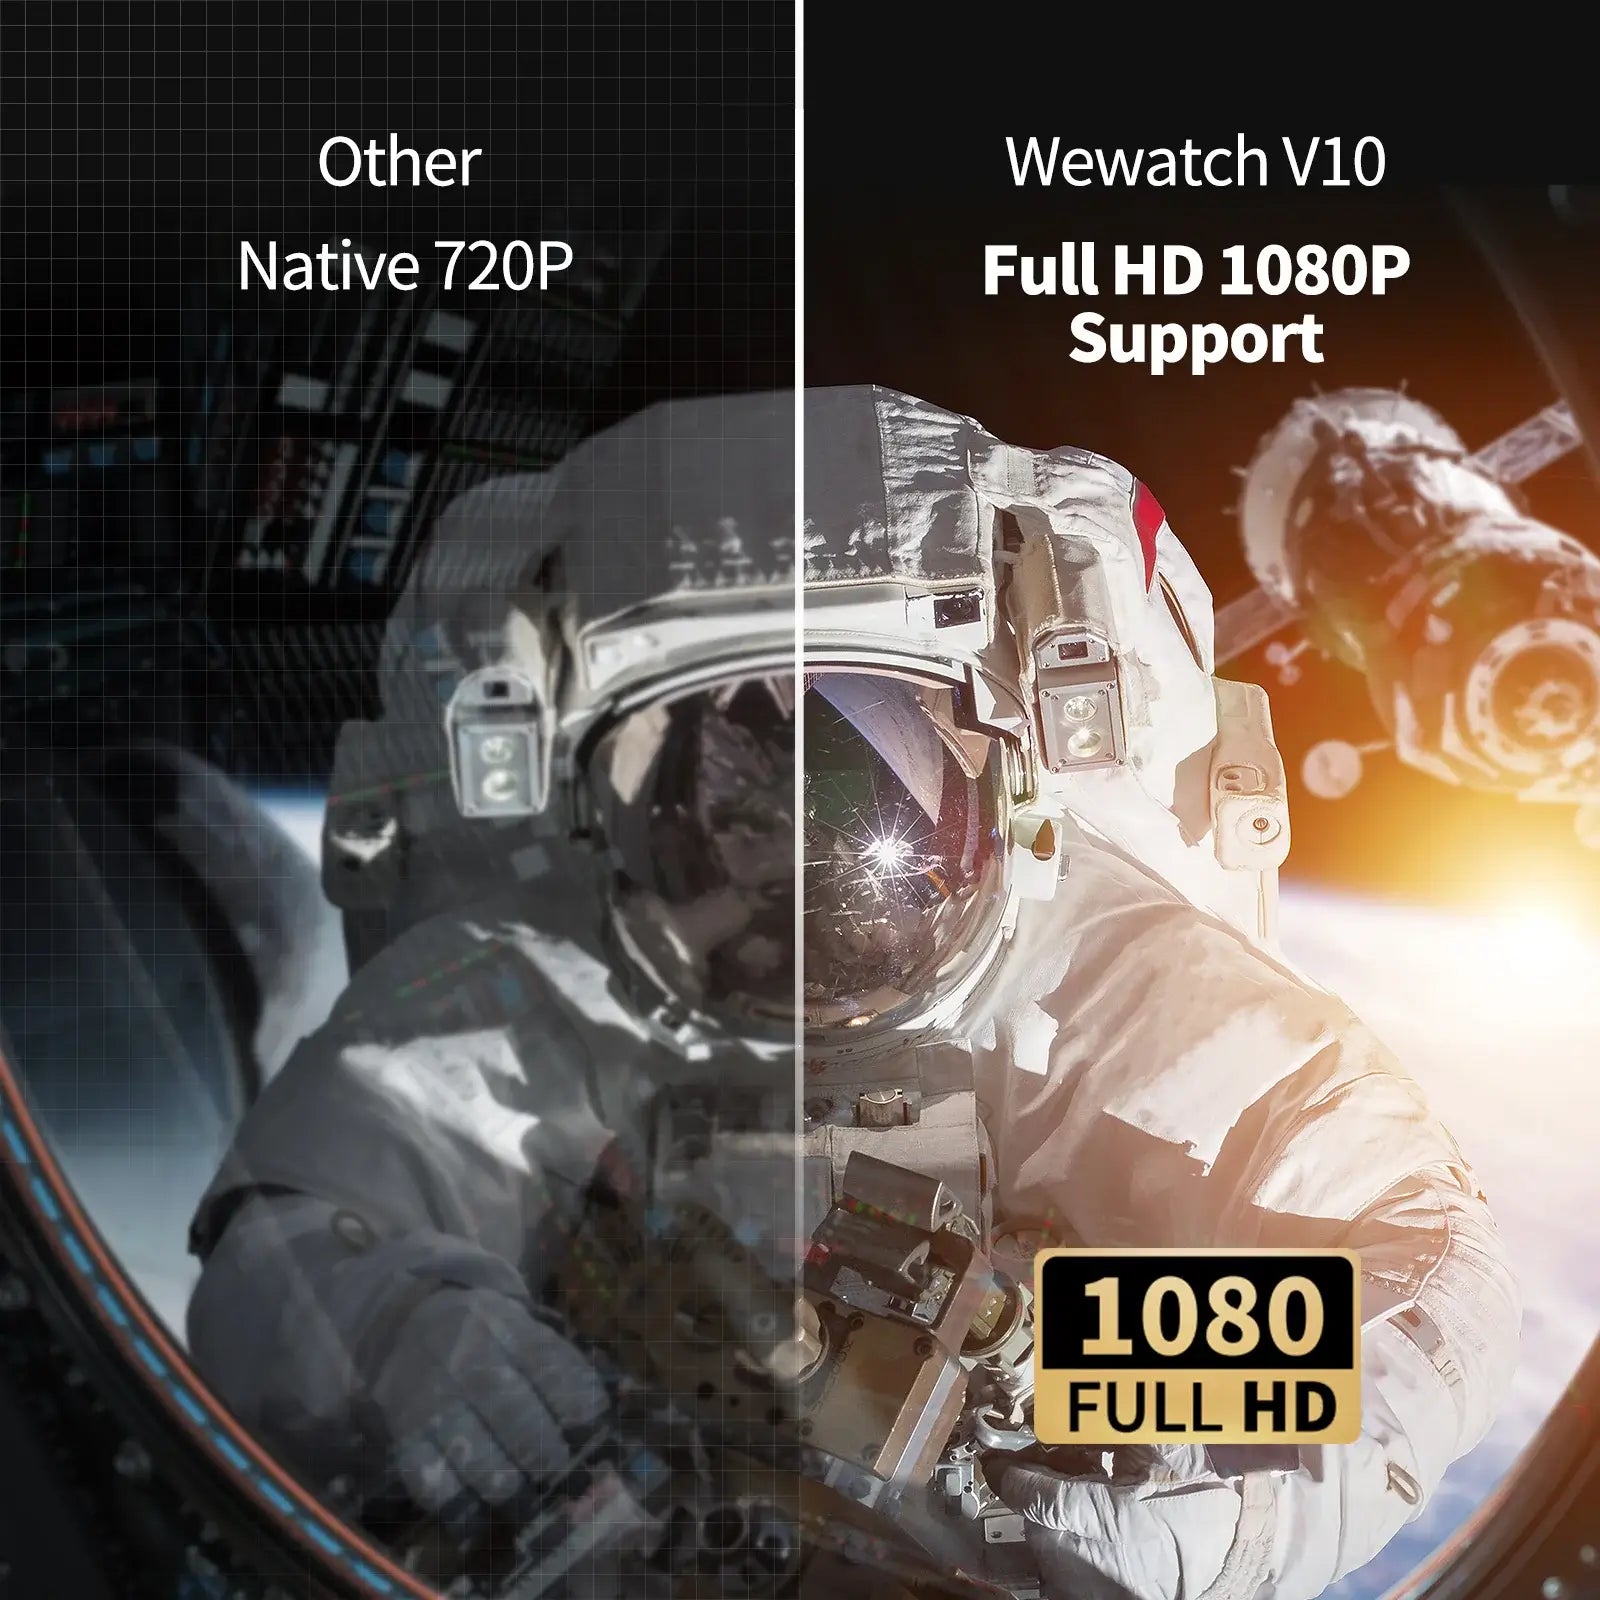 wewatch-V10-full-HD-1080p-support